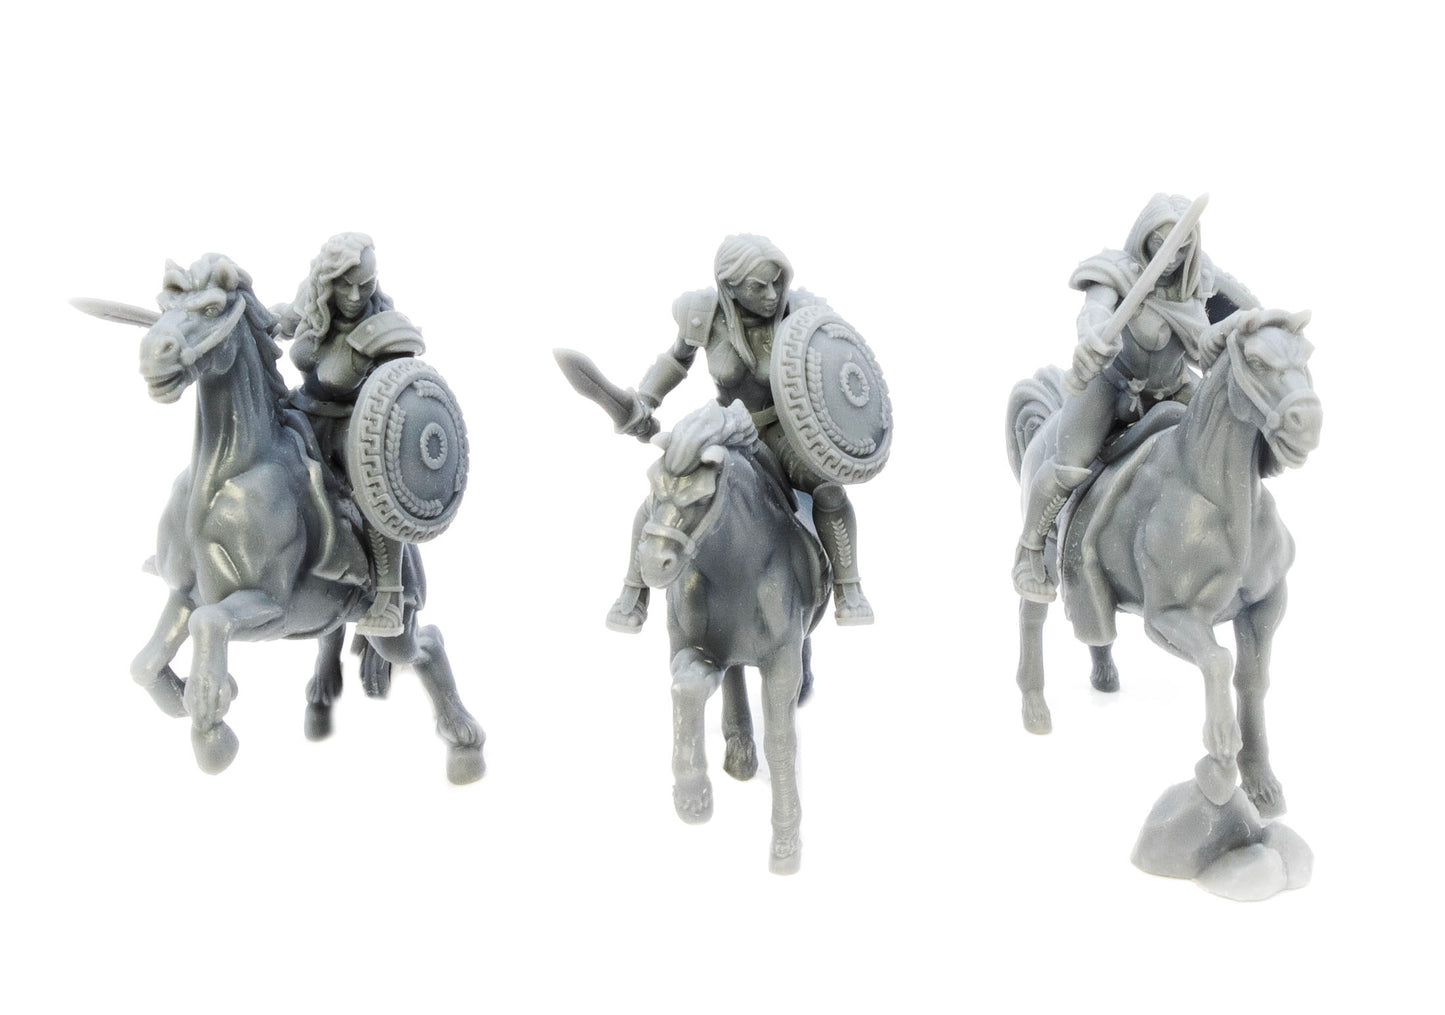 Spartan Cavalry without helmets and swords